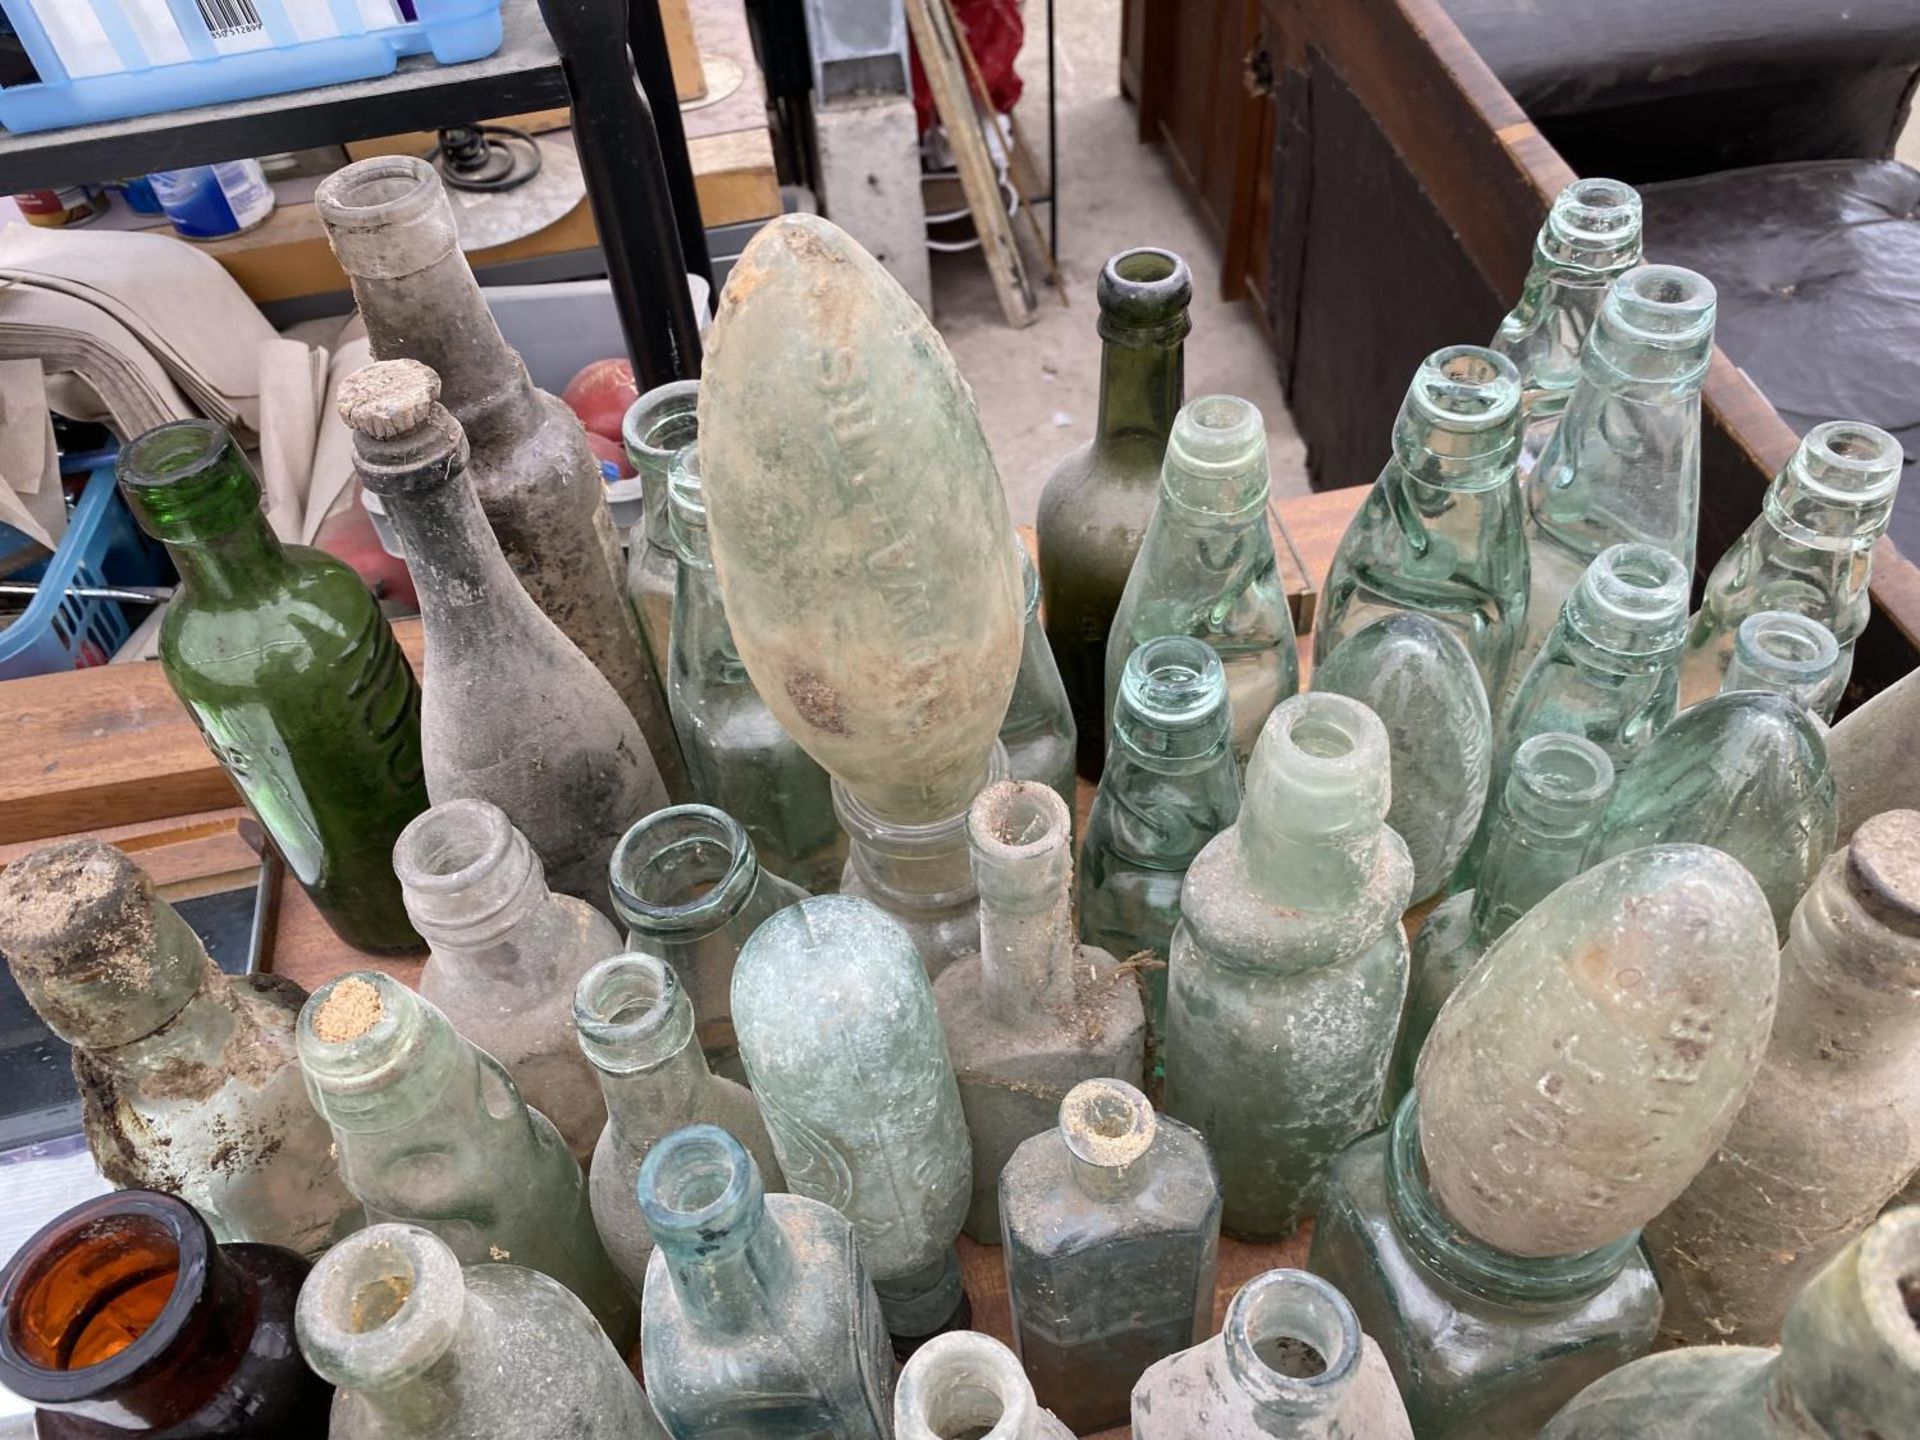 A LARGE QUANTITY OF VINTAGE GLASS BOTTLES SOME BEARING NAMES - Image 3 of 3